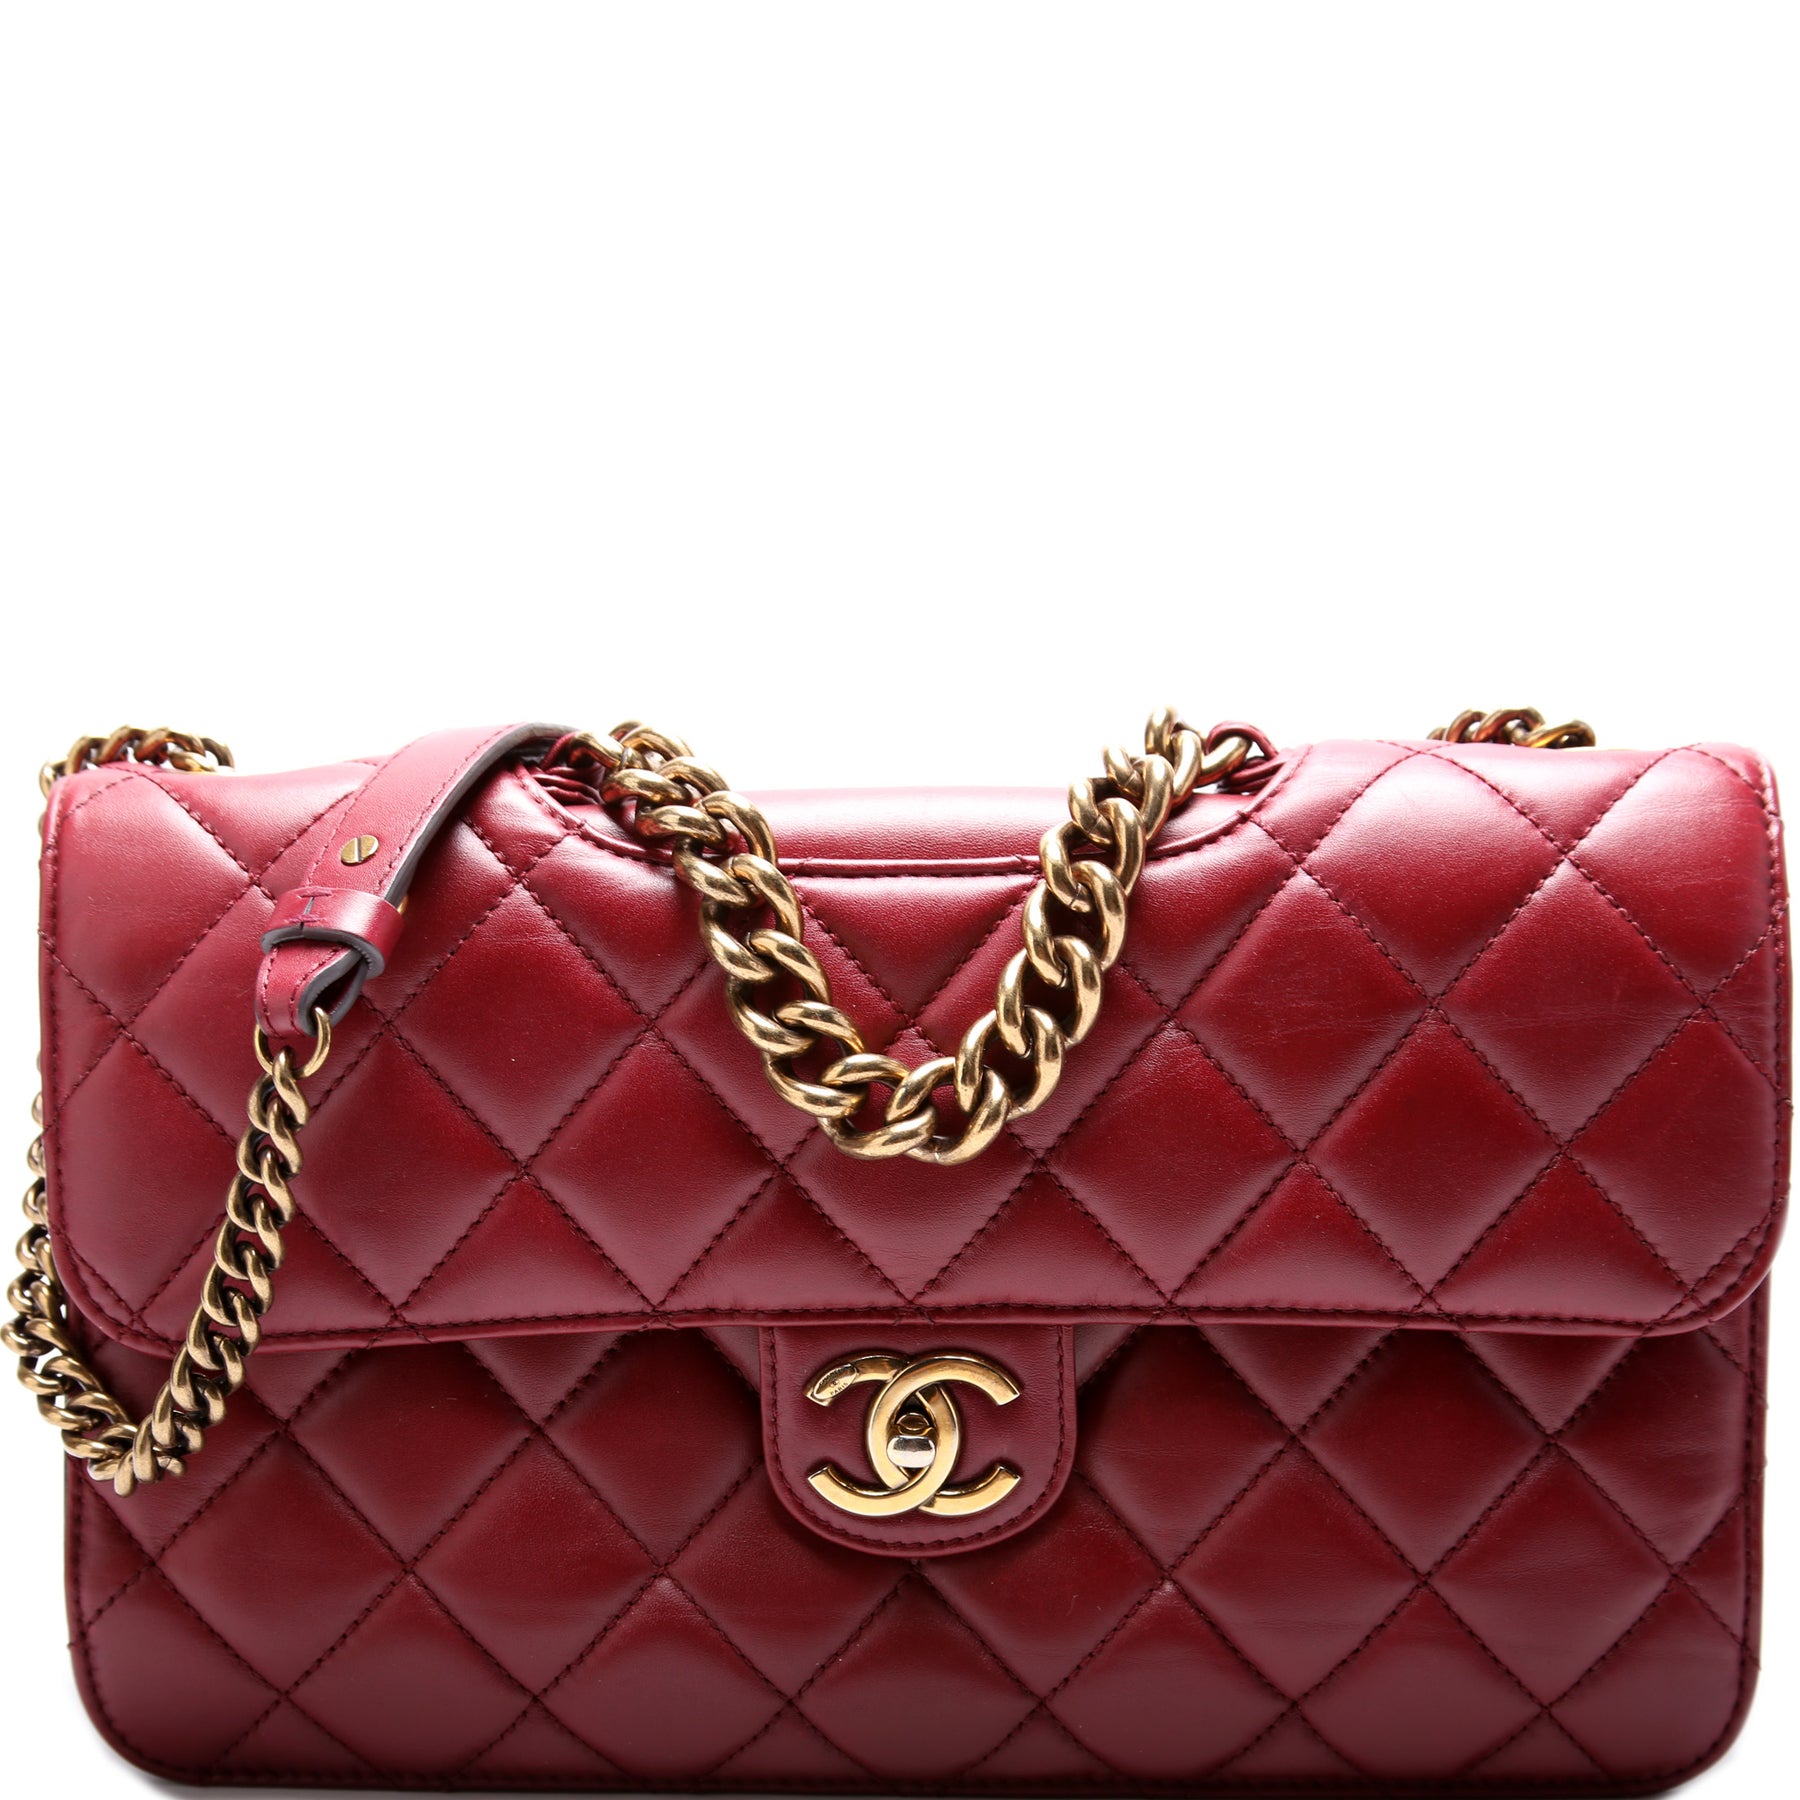 Chanel Black Quilted Calfskin Ultra Stitch Jumbo Flap Bag